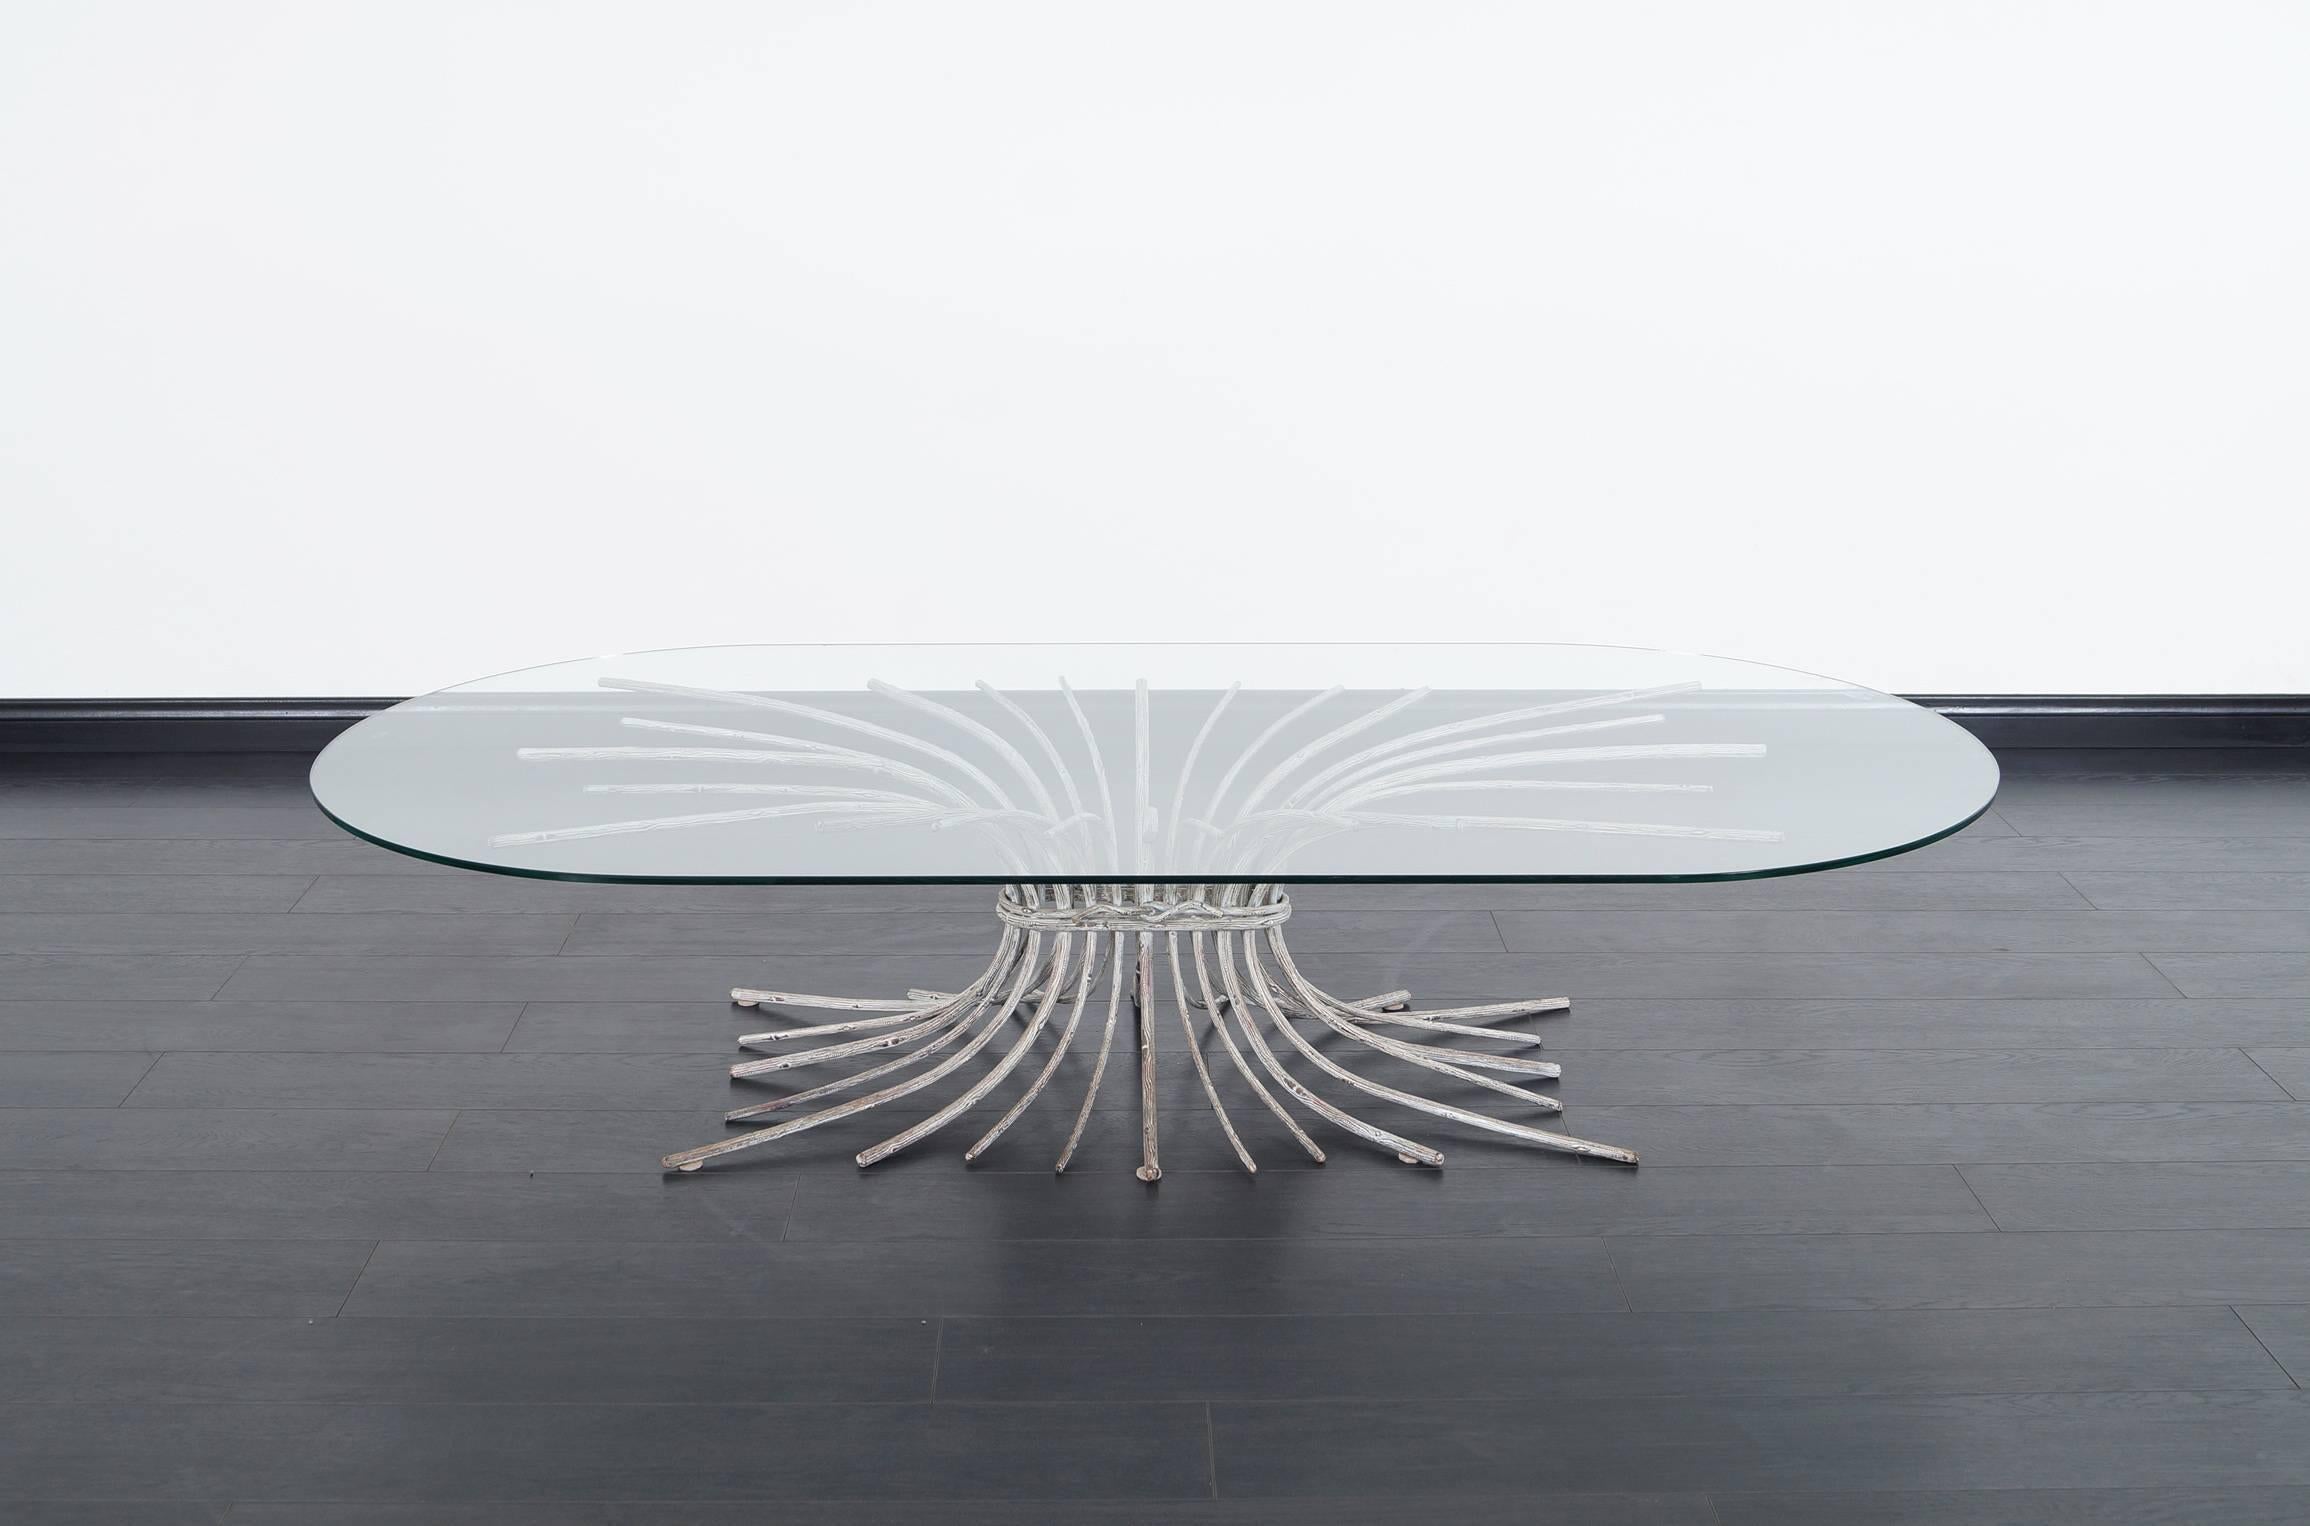 Exceptional vintage bronze “Tree” sculpture coffee table, circa 1960s. This coffee table features a structurally designed base in the shape of a tree trunk. The solid bronze base stands out for its abstract design and defined lines throughout its